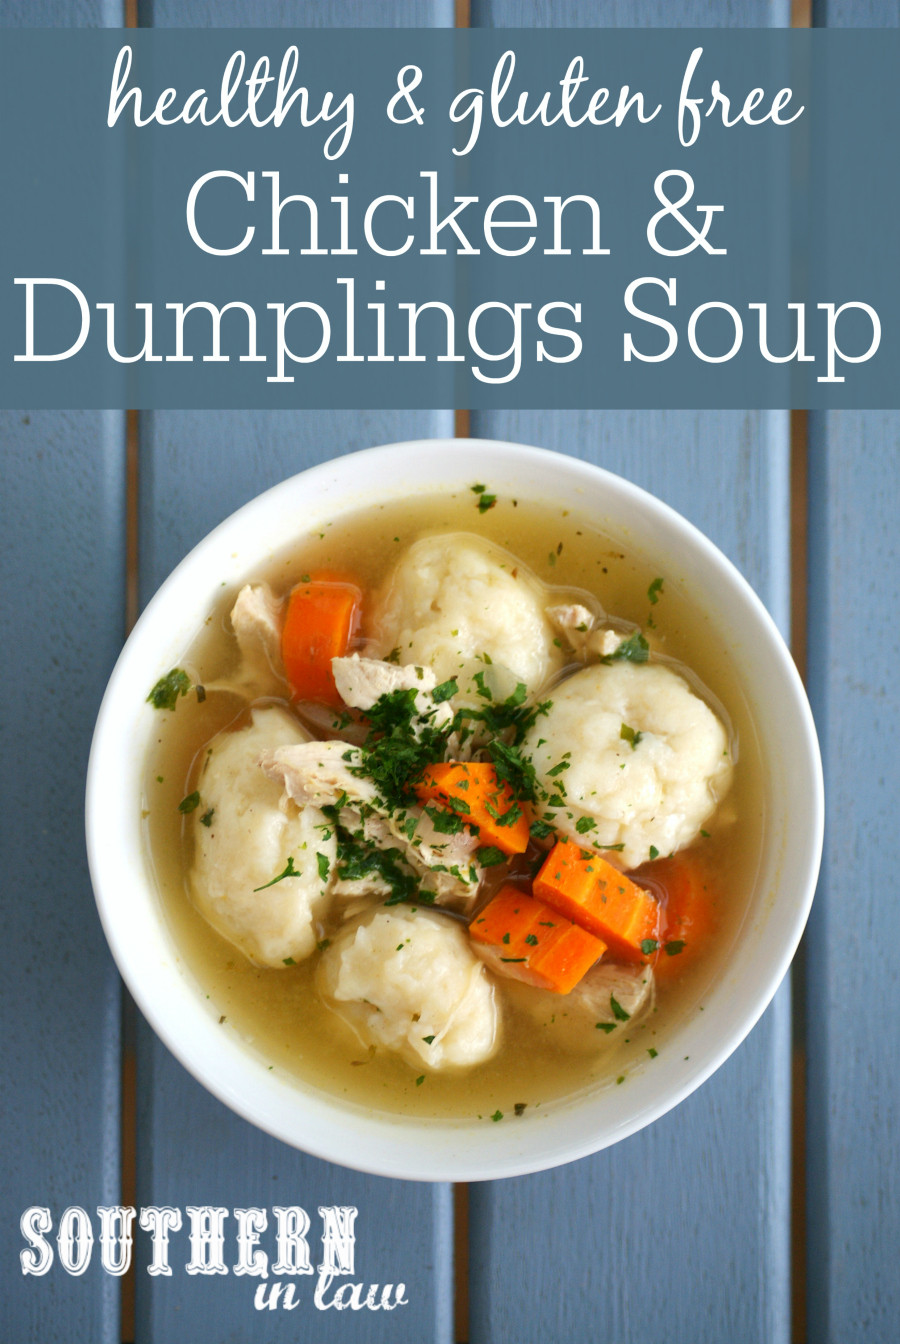 Chicken Soup Recipe Healthy
 Southern In Law Recipe Healthy Chicken and Dumpling Soup